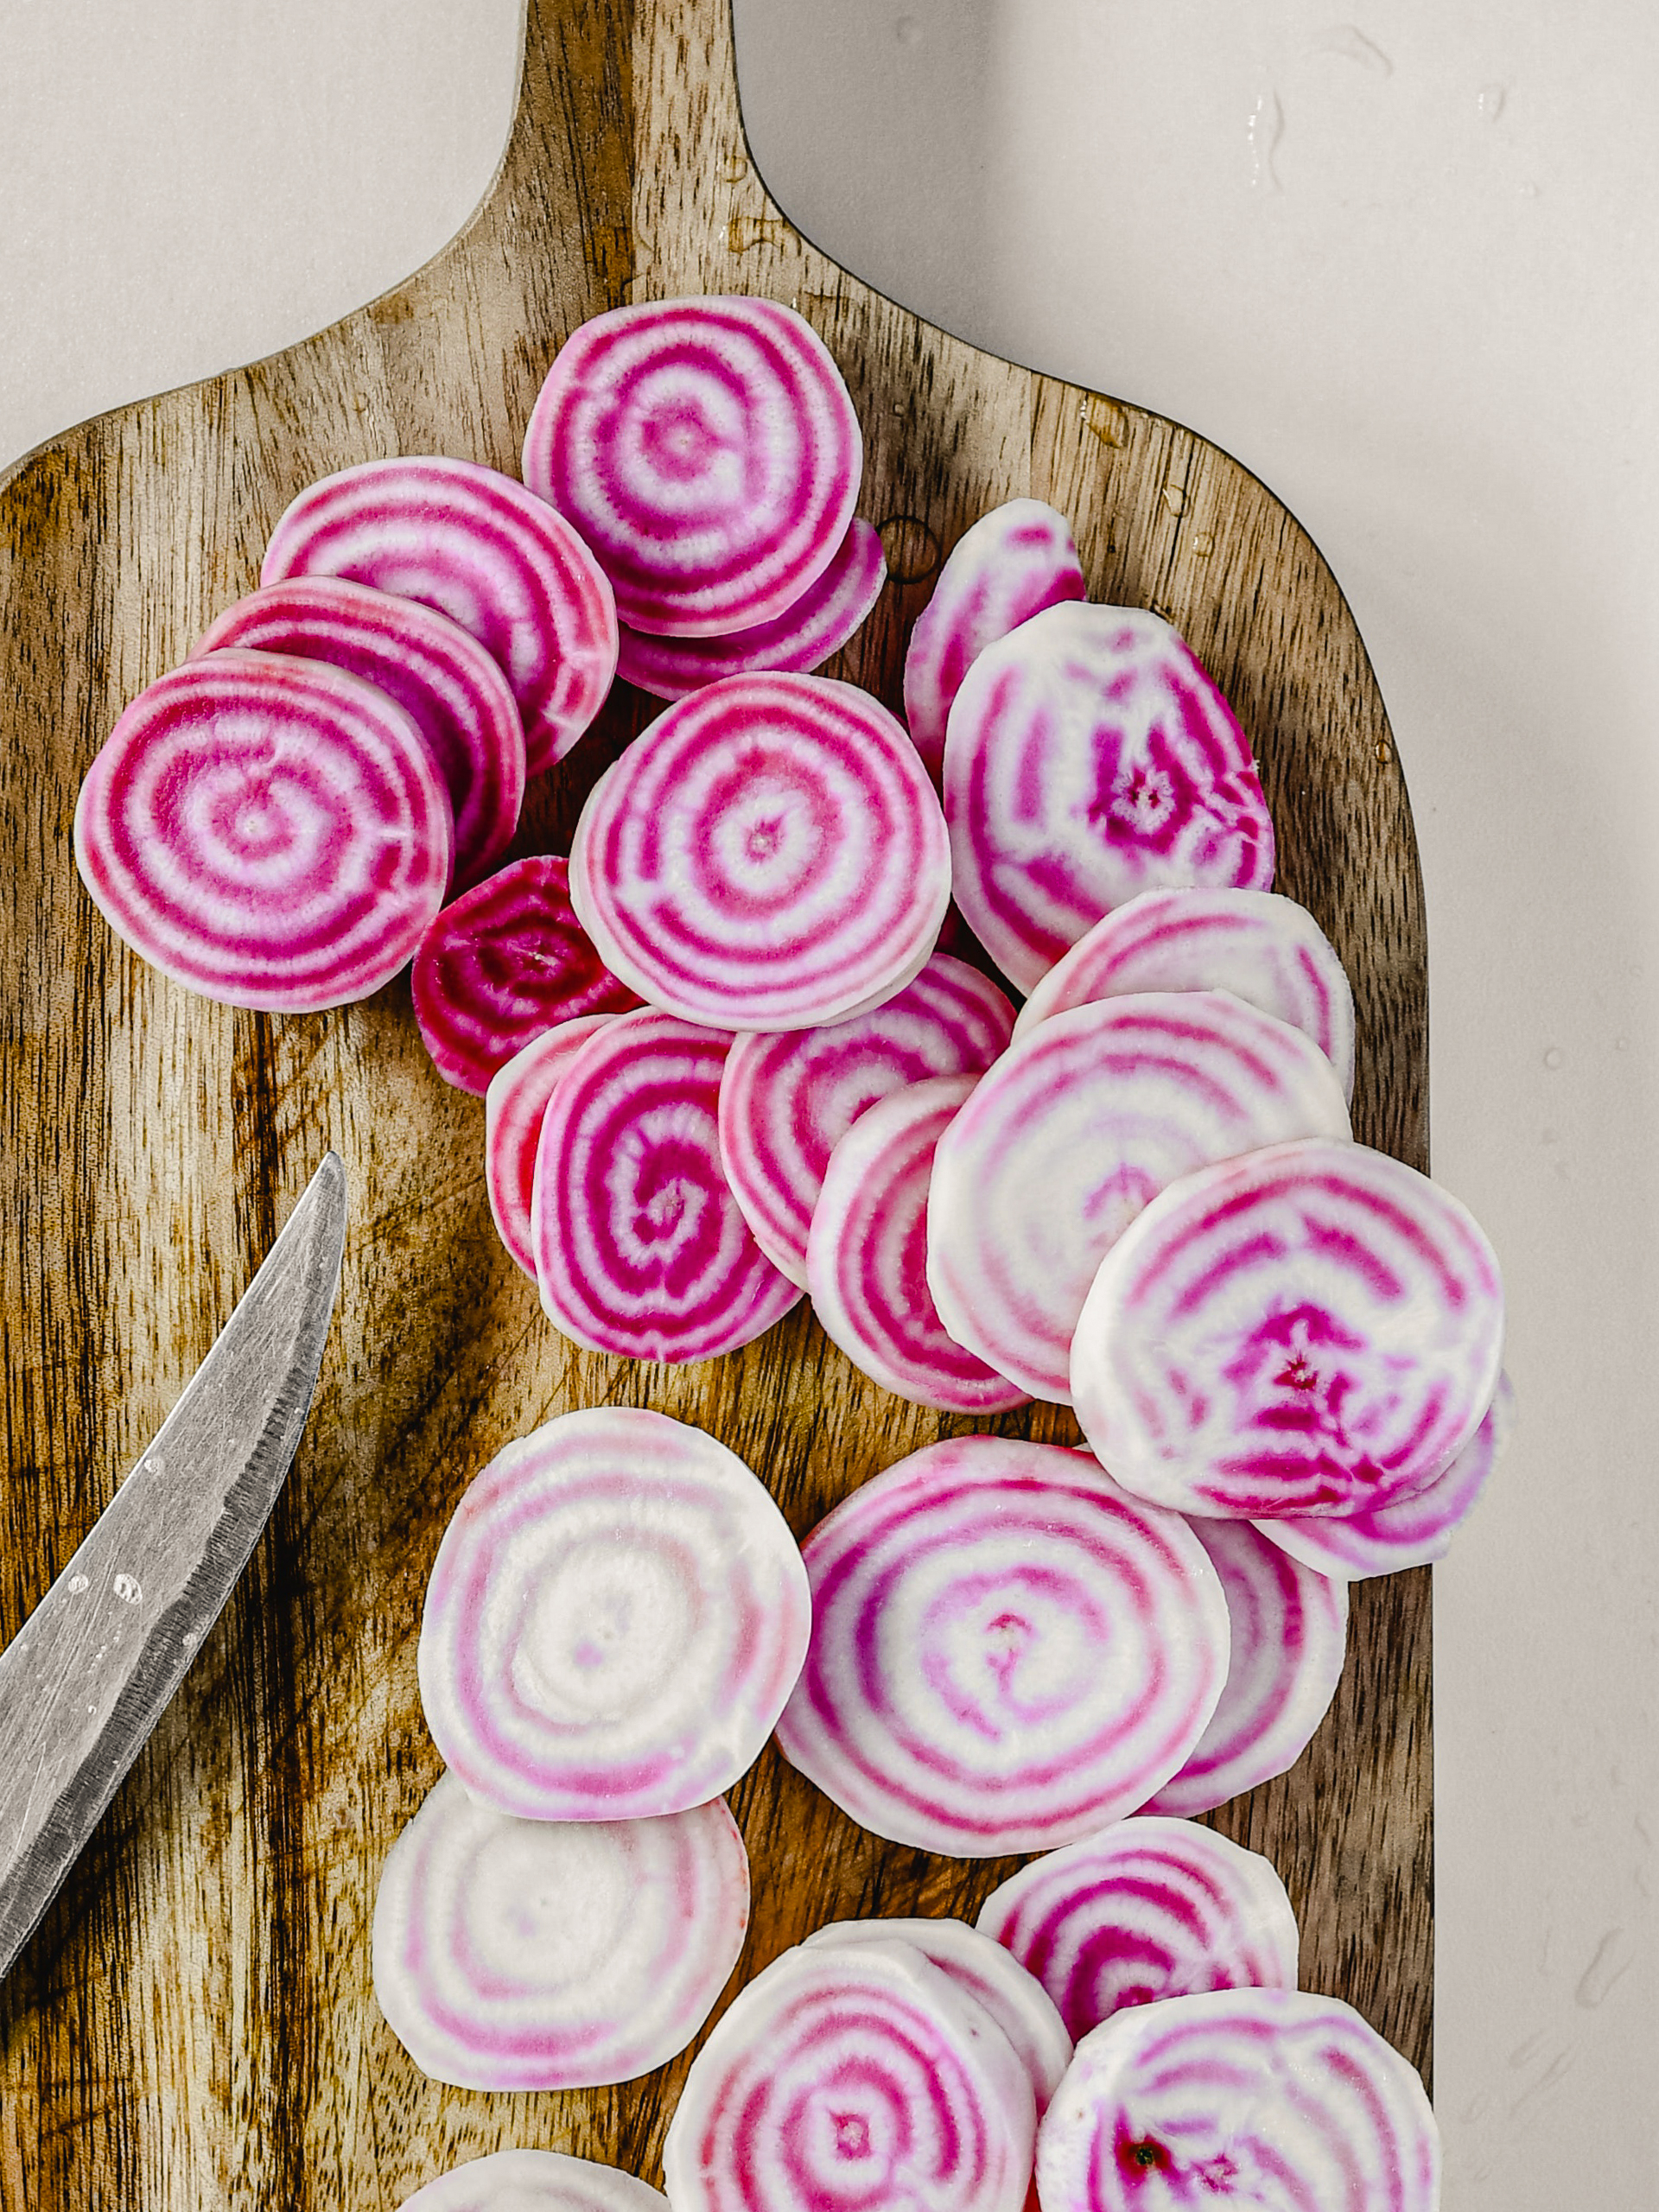 Why Beets Are Incredibly Good For You